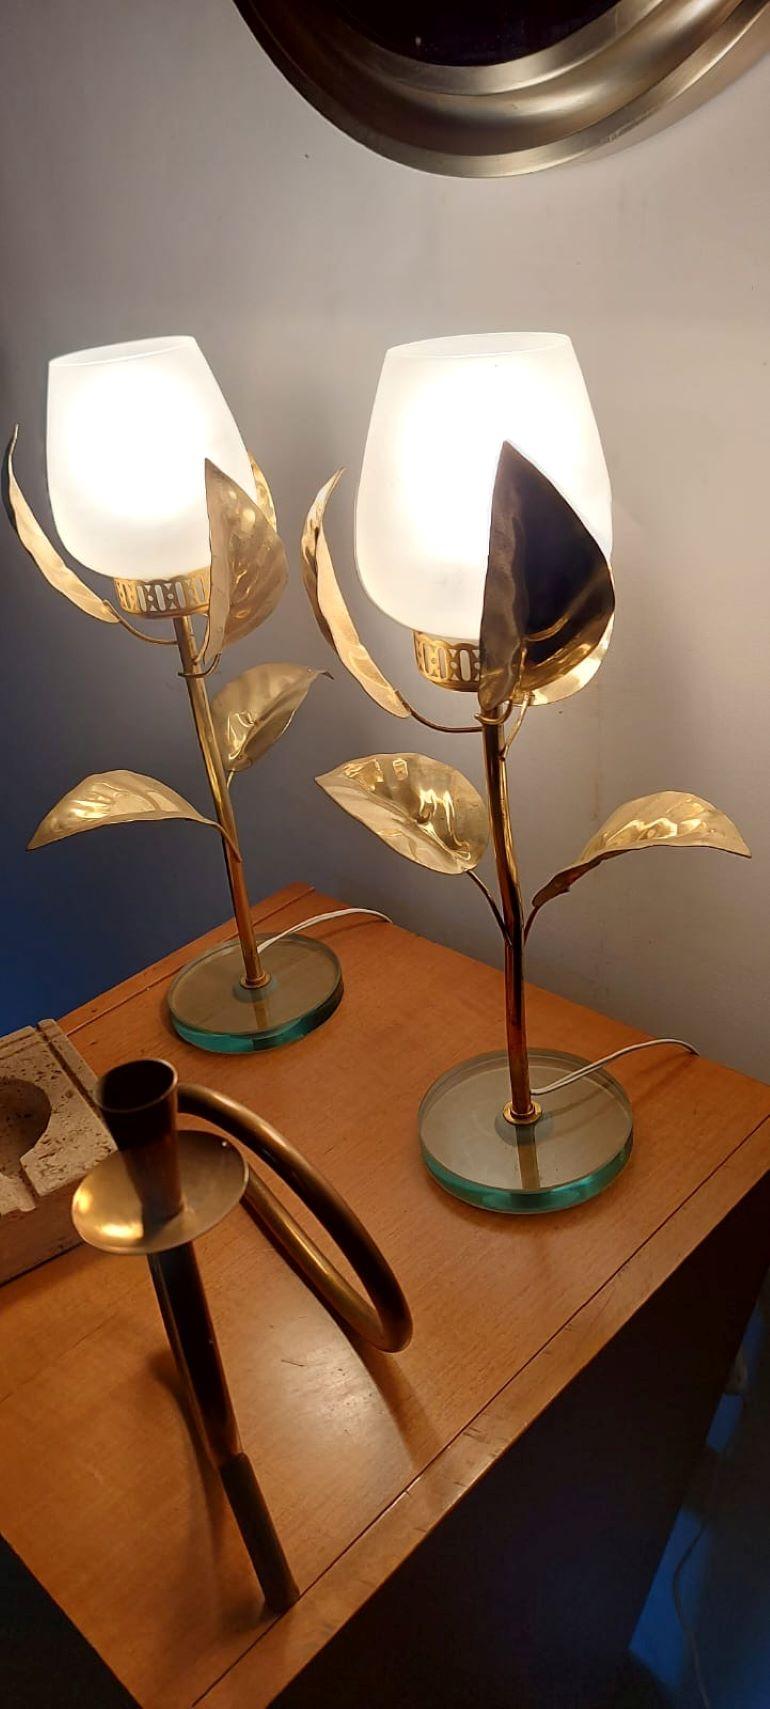  Pair of Mid-Century Flower-Shaped Lamps in White Murano Glass and Brass 1950s For Sale 1